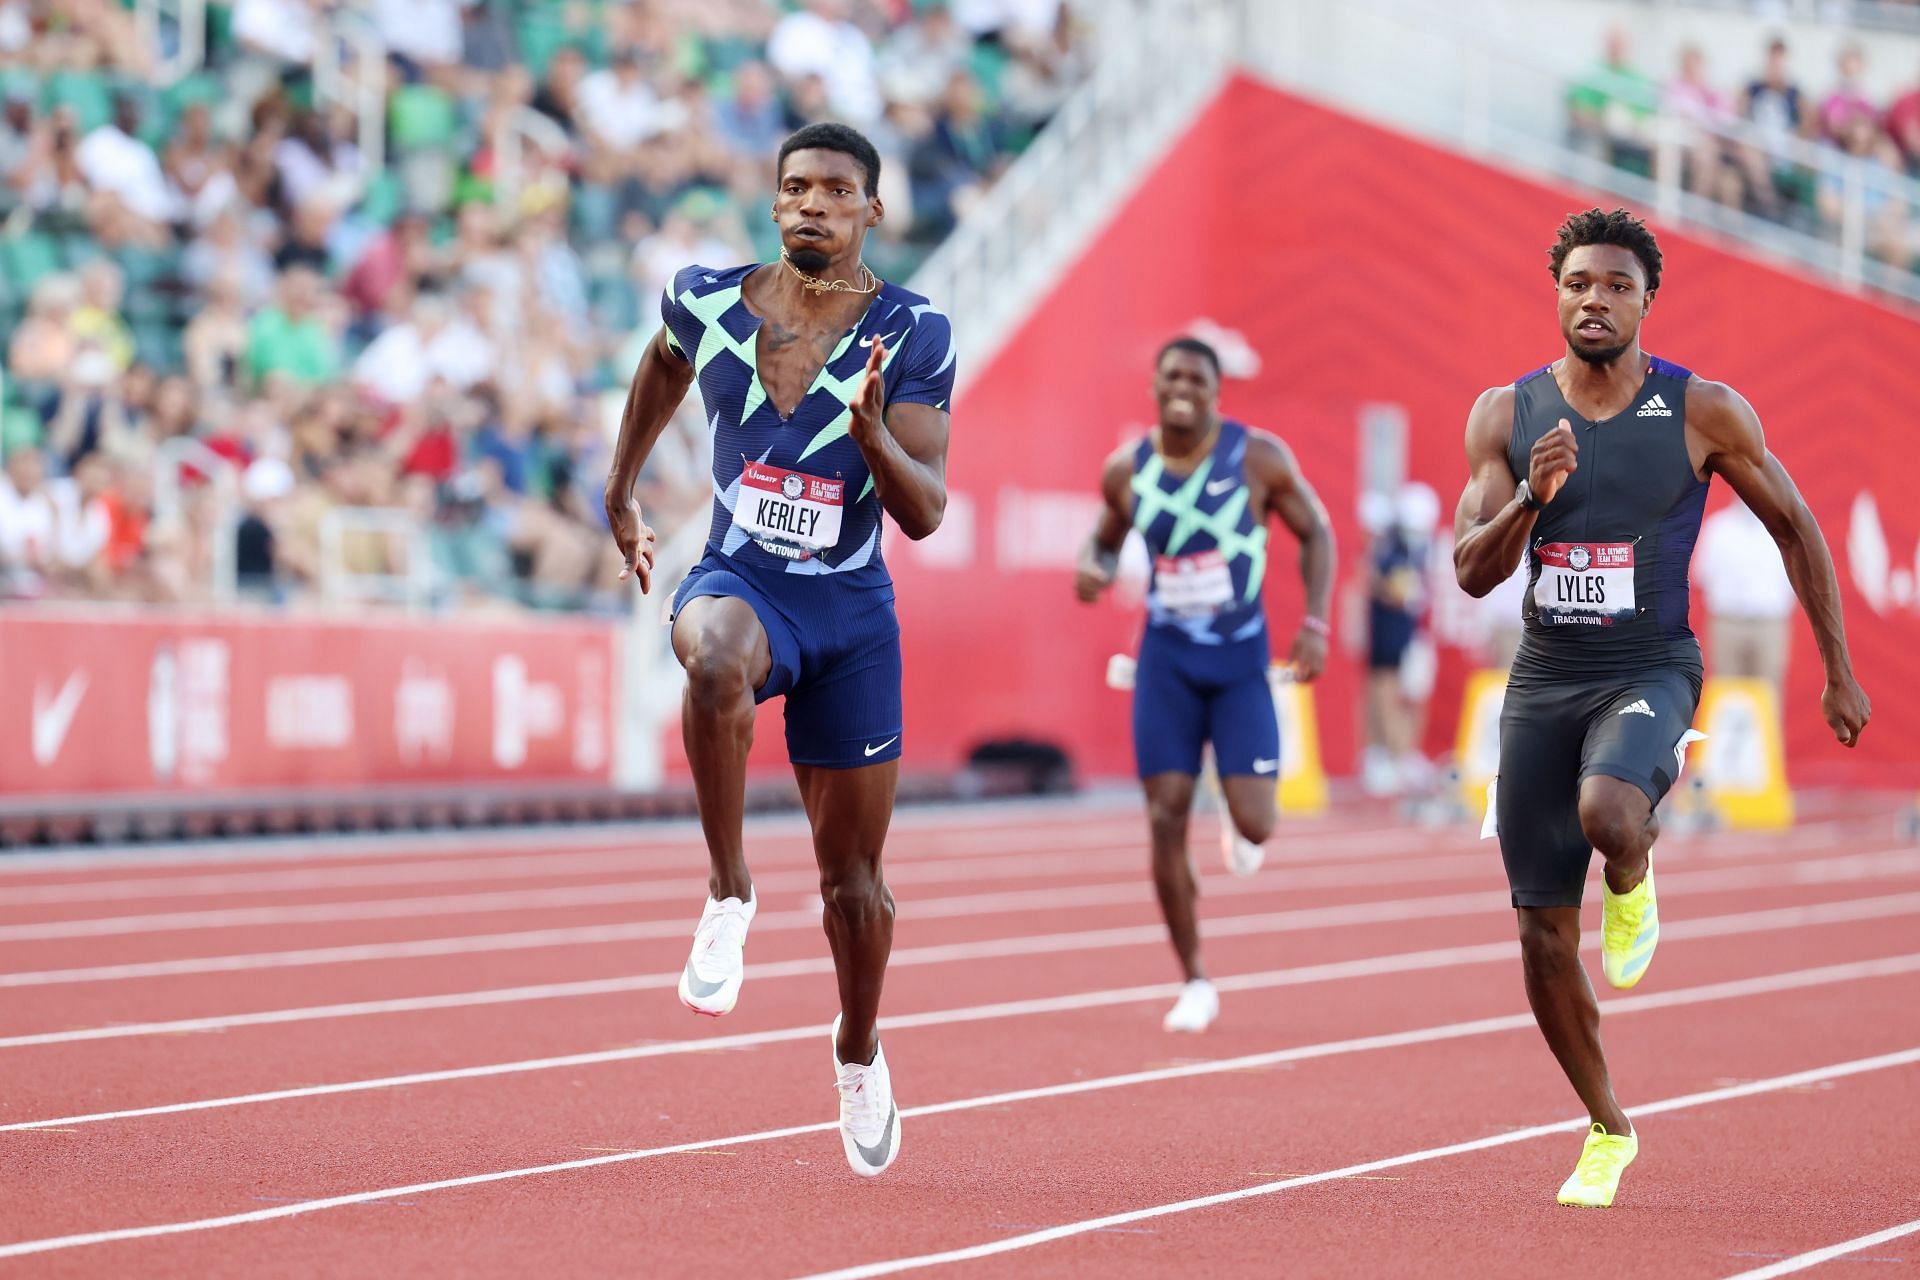 Fred Kerley secured a silver medal in the 100m at the 2020 Olympics in Tokyo, Japan.